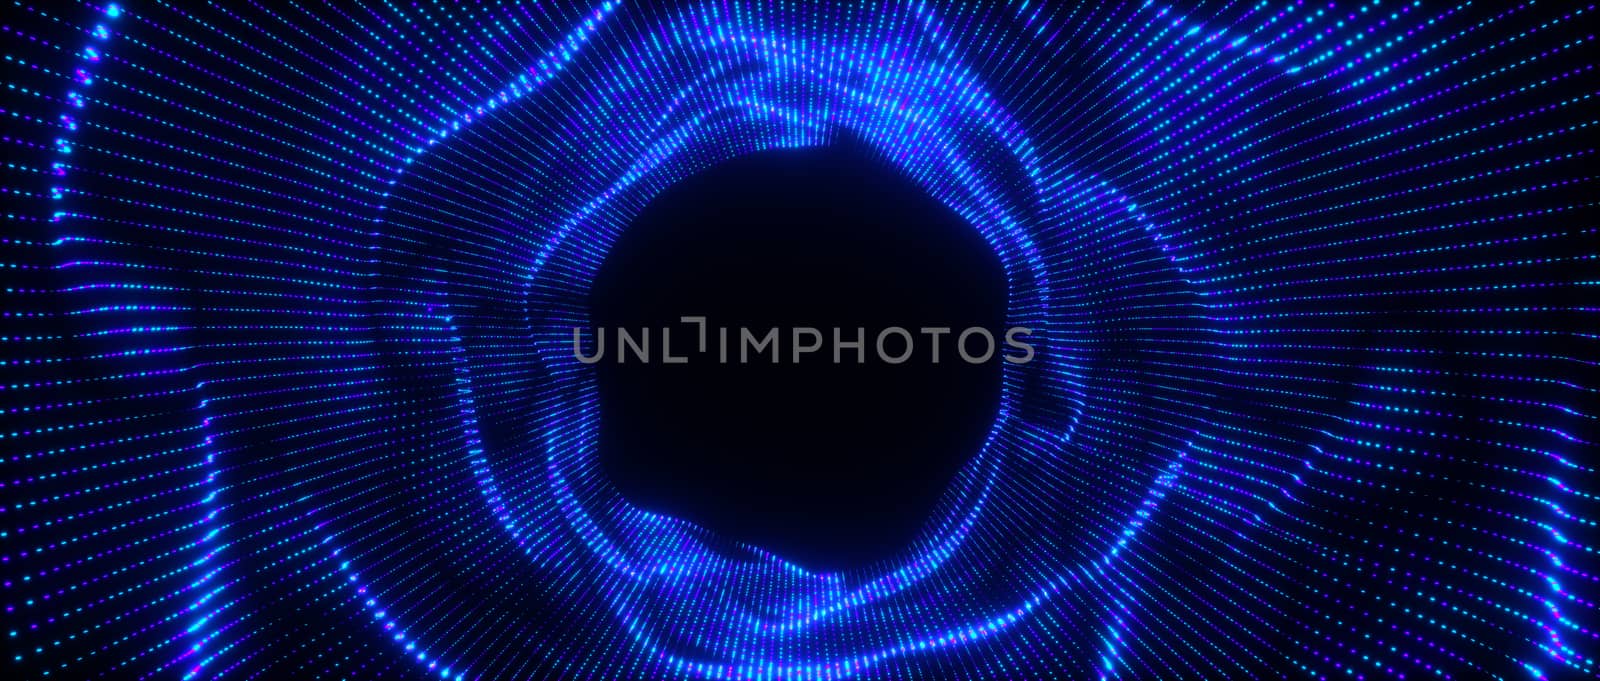 Abstract big data futuristic light wallpaper background design. Science dark pattern with structure mesh and circles. Modern business space dots illustration with bokeh. 3D render by Shanvood